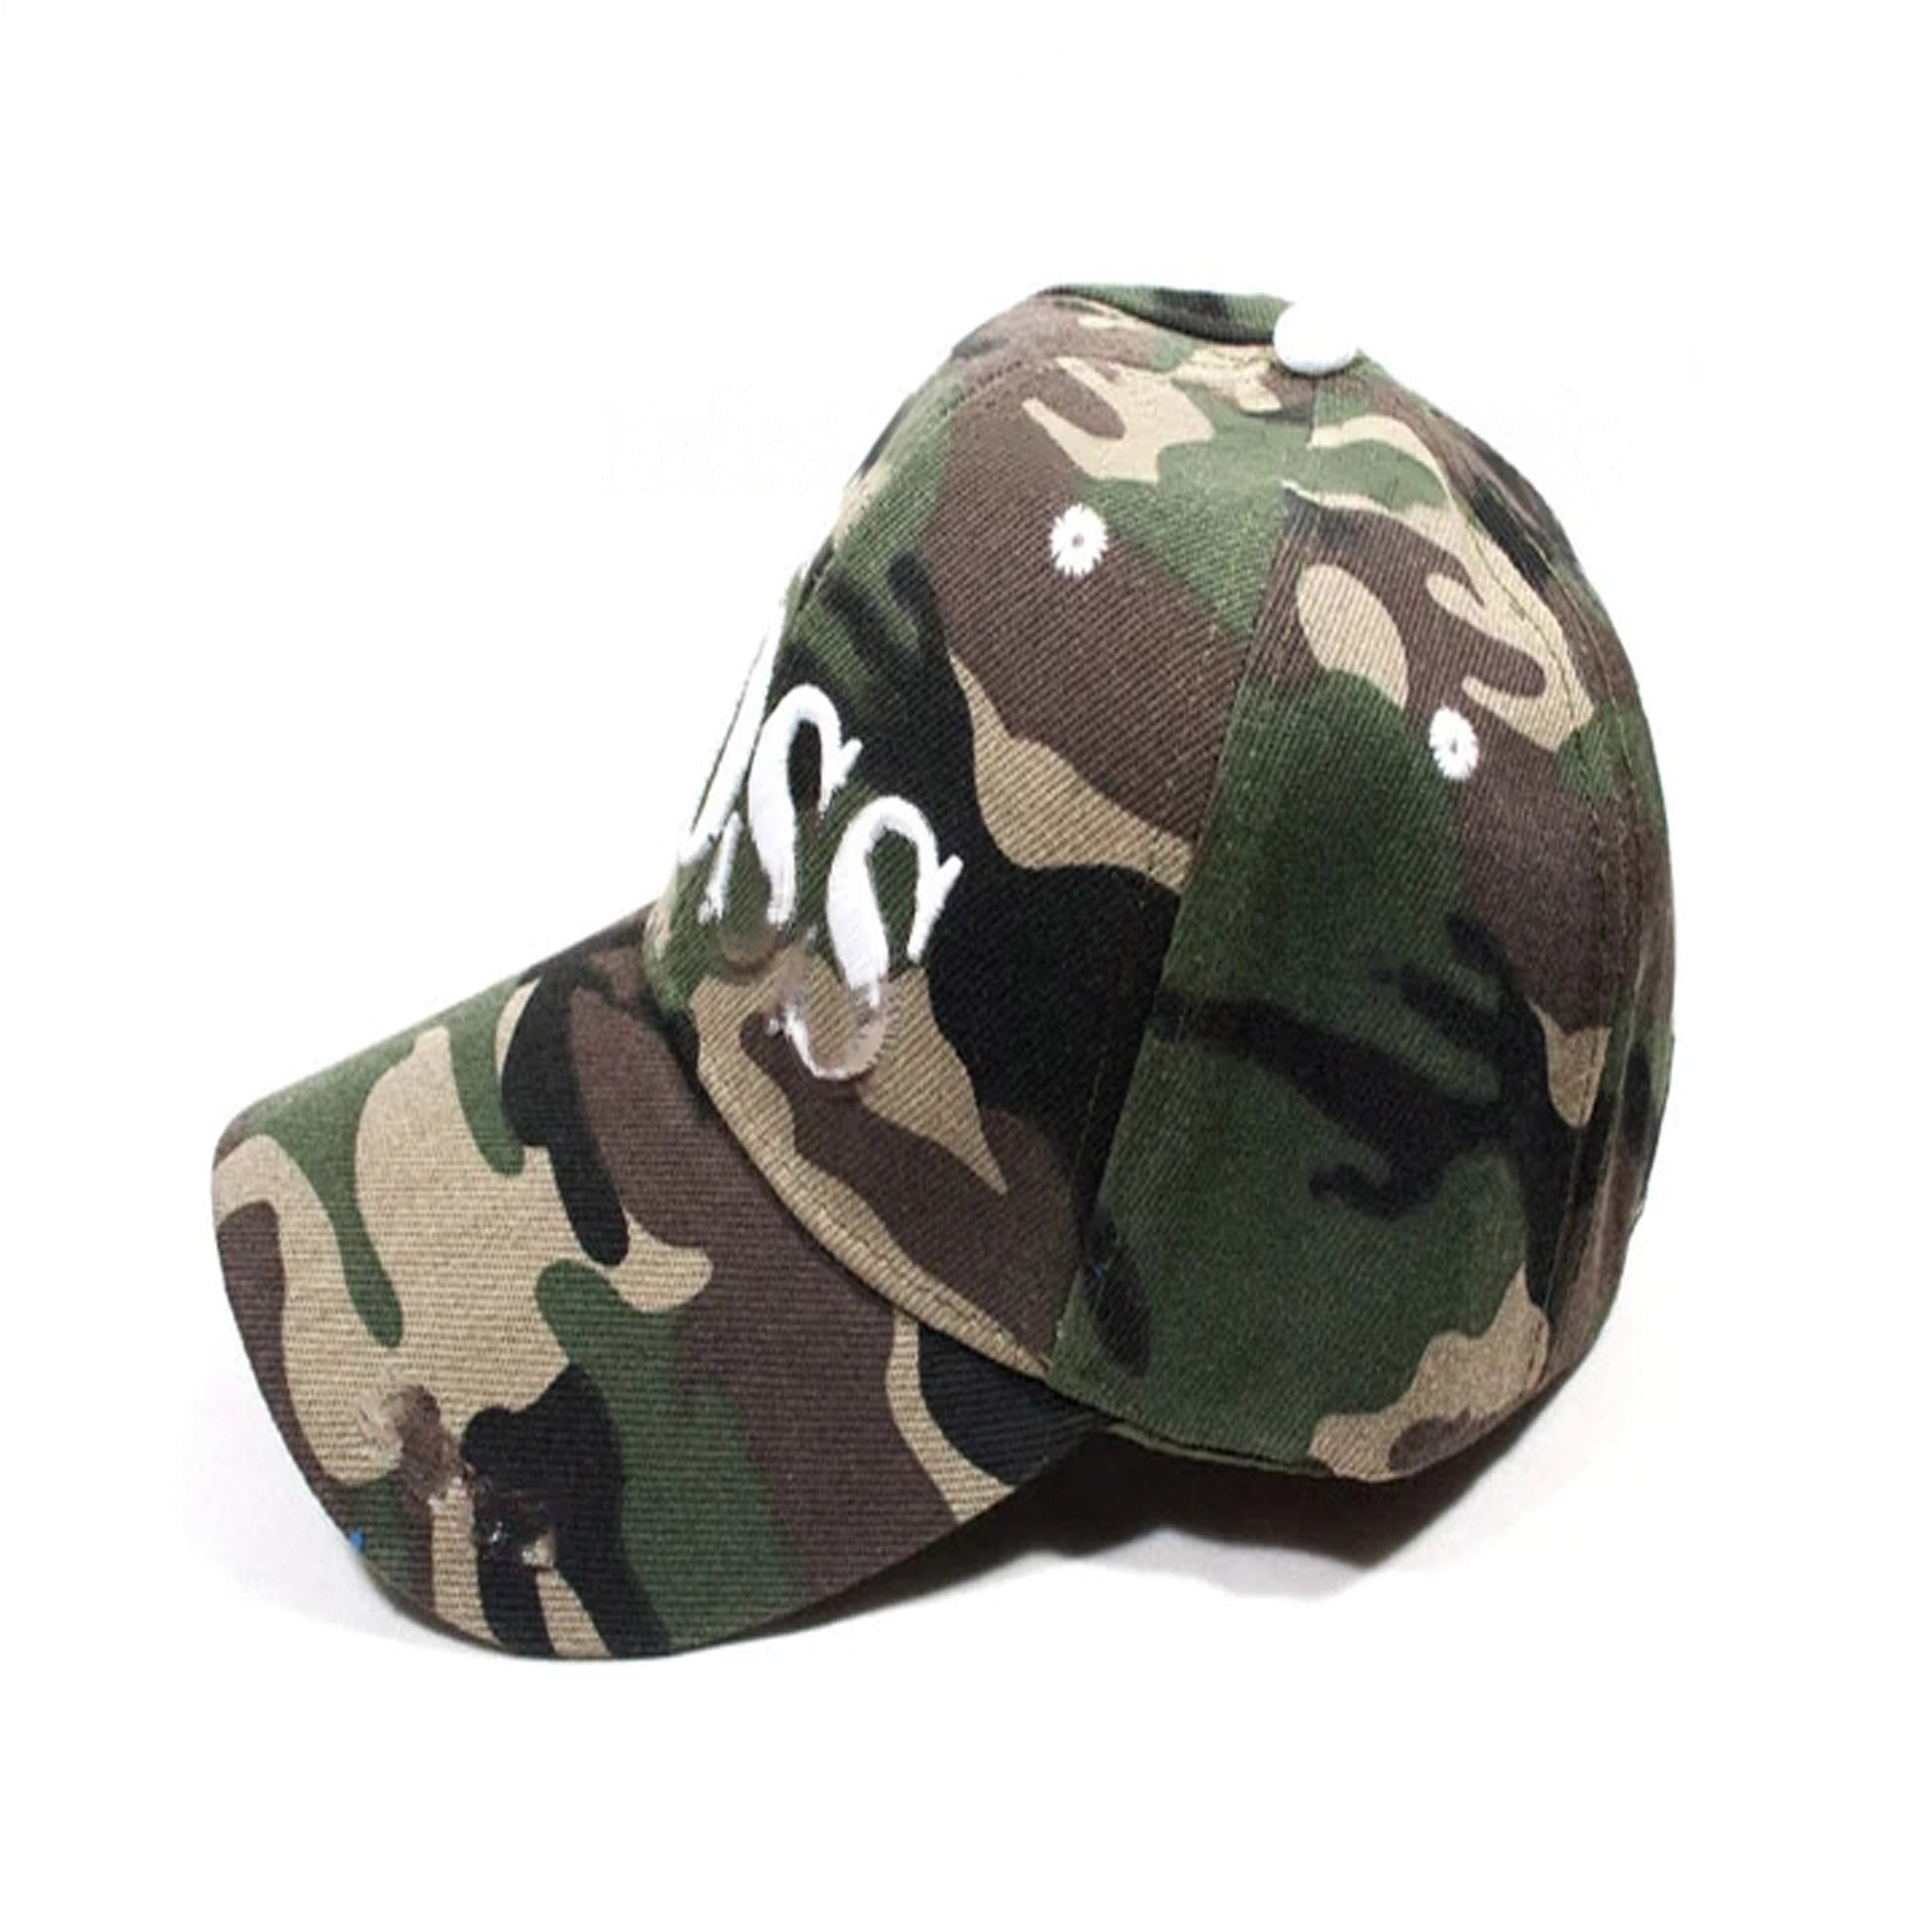 "I'm the Boss" Casual Caps For Kids And Adults Wholesale MOQ -12 pcs